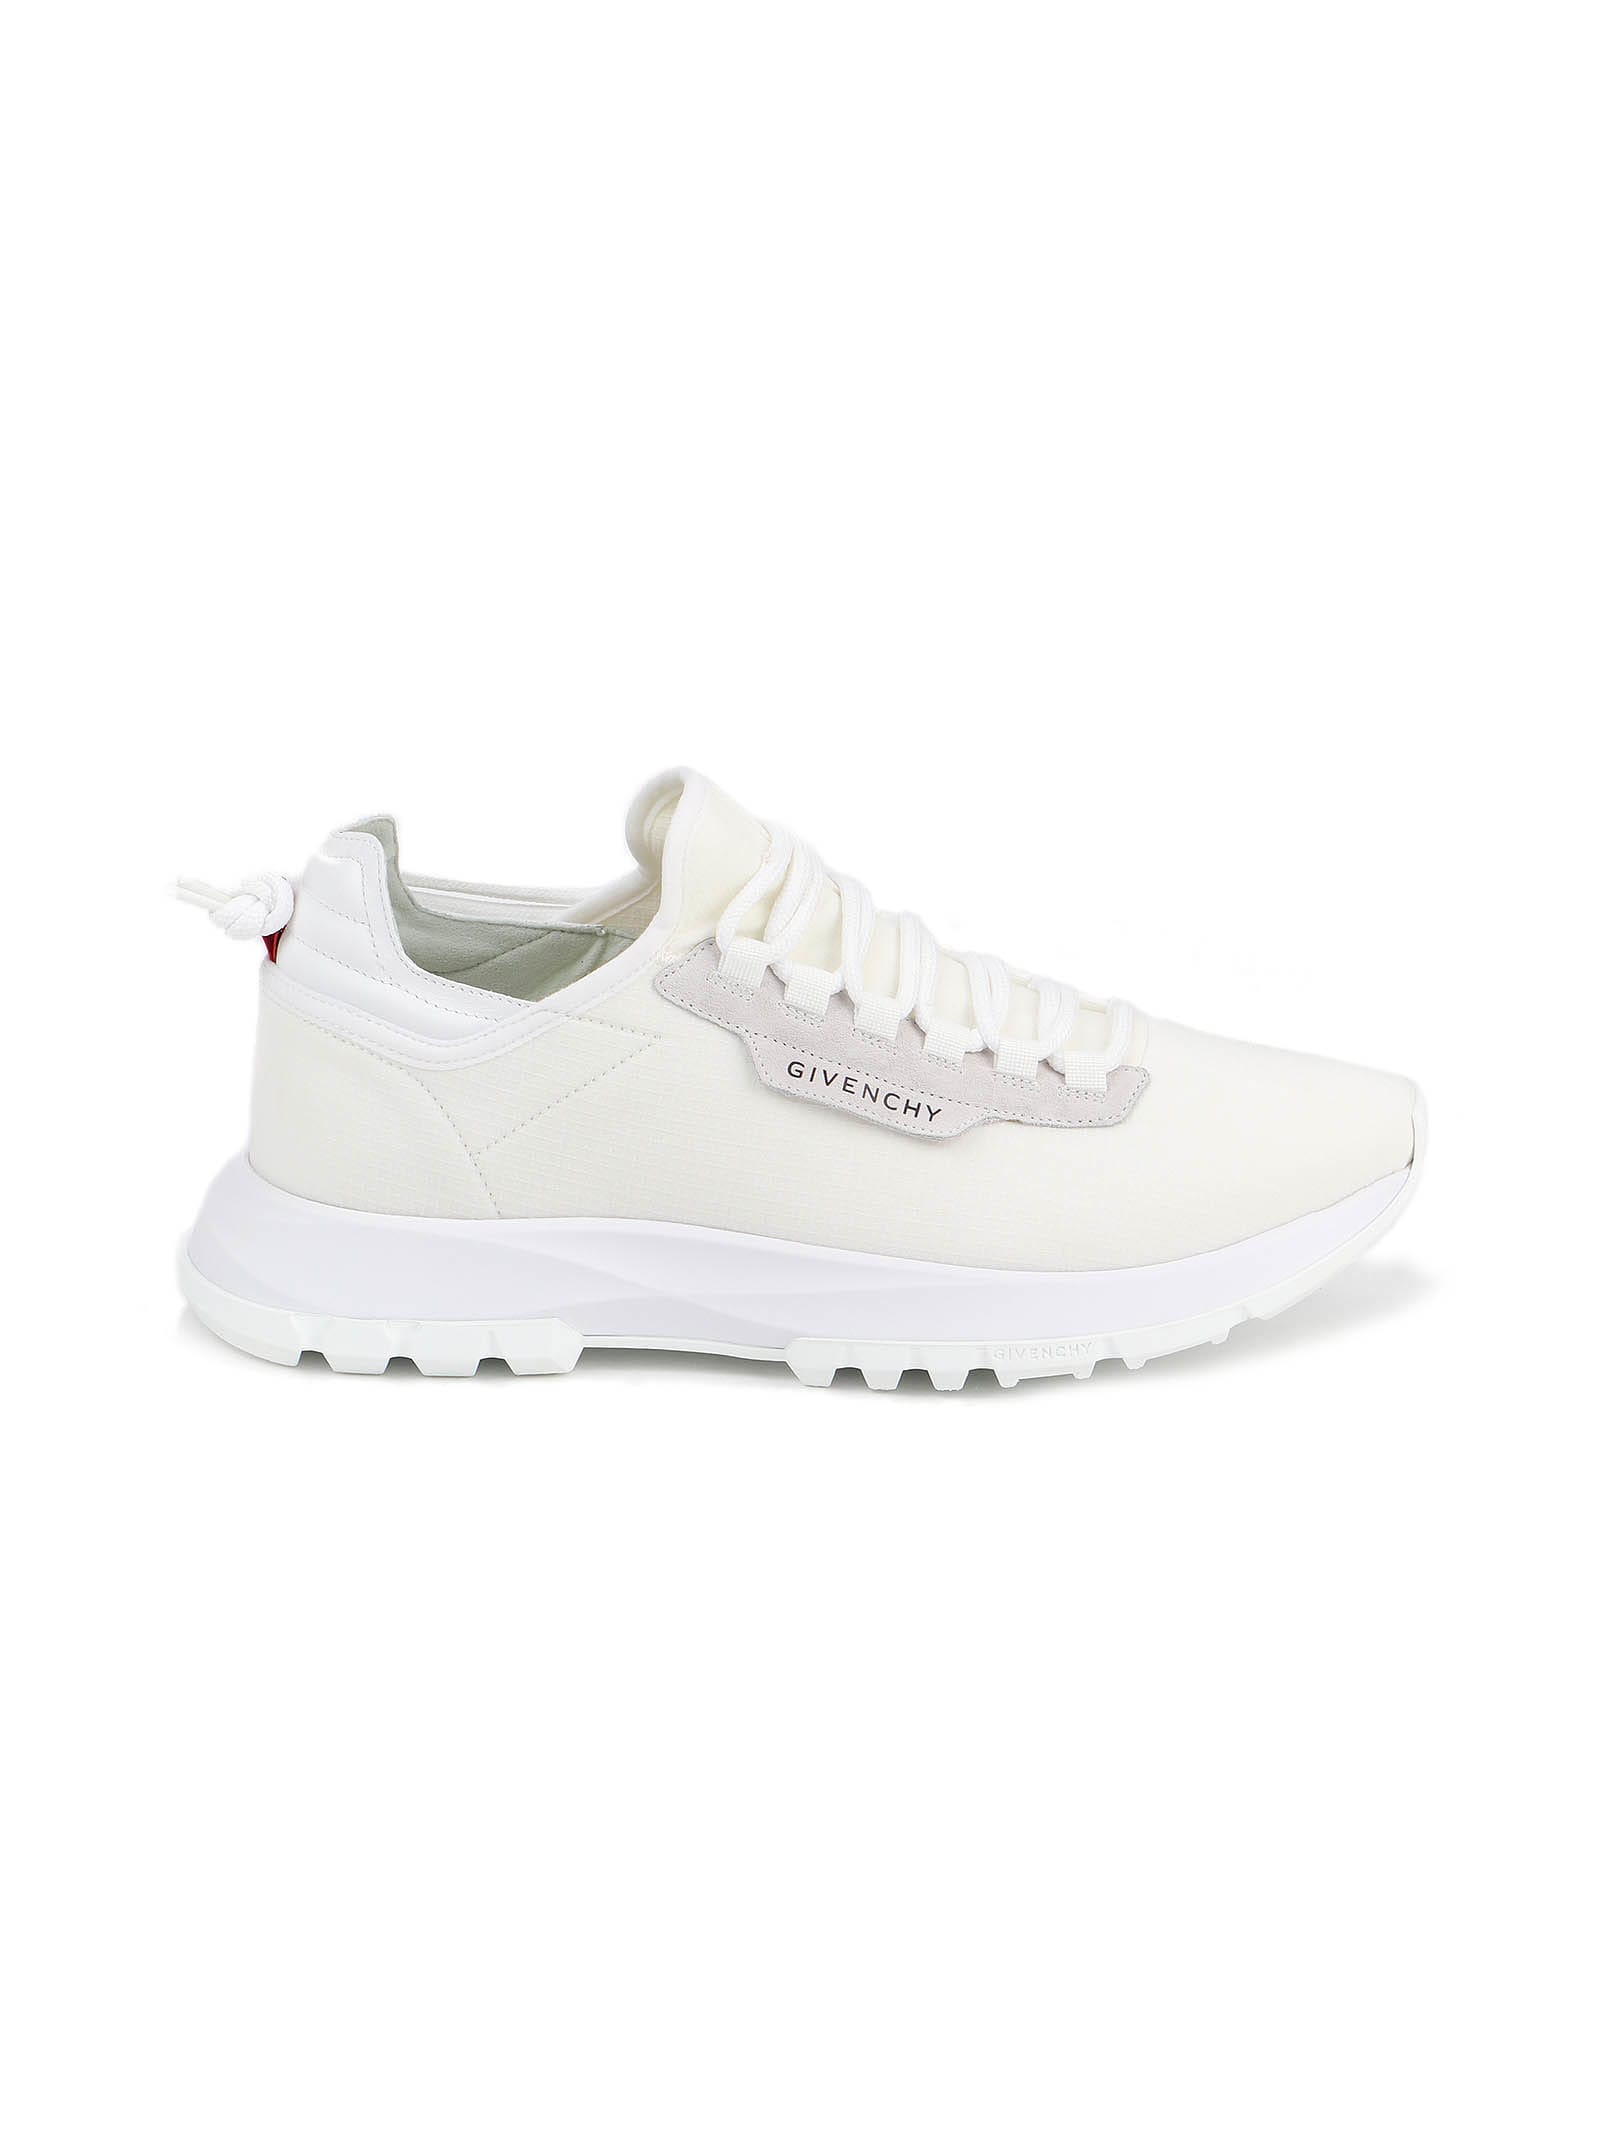 GIVENCHY SPECTRE RUNNER LOW SNEAKER,11291495